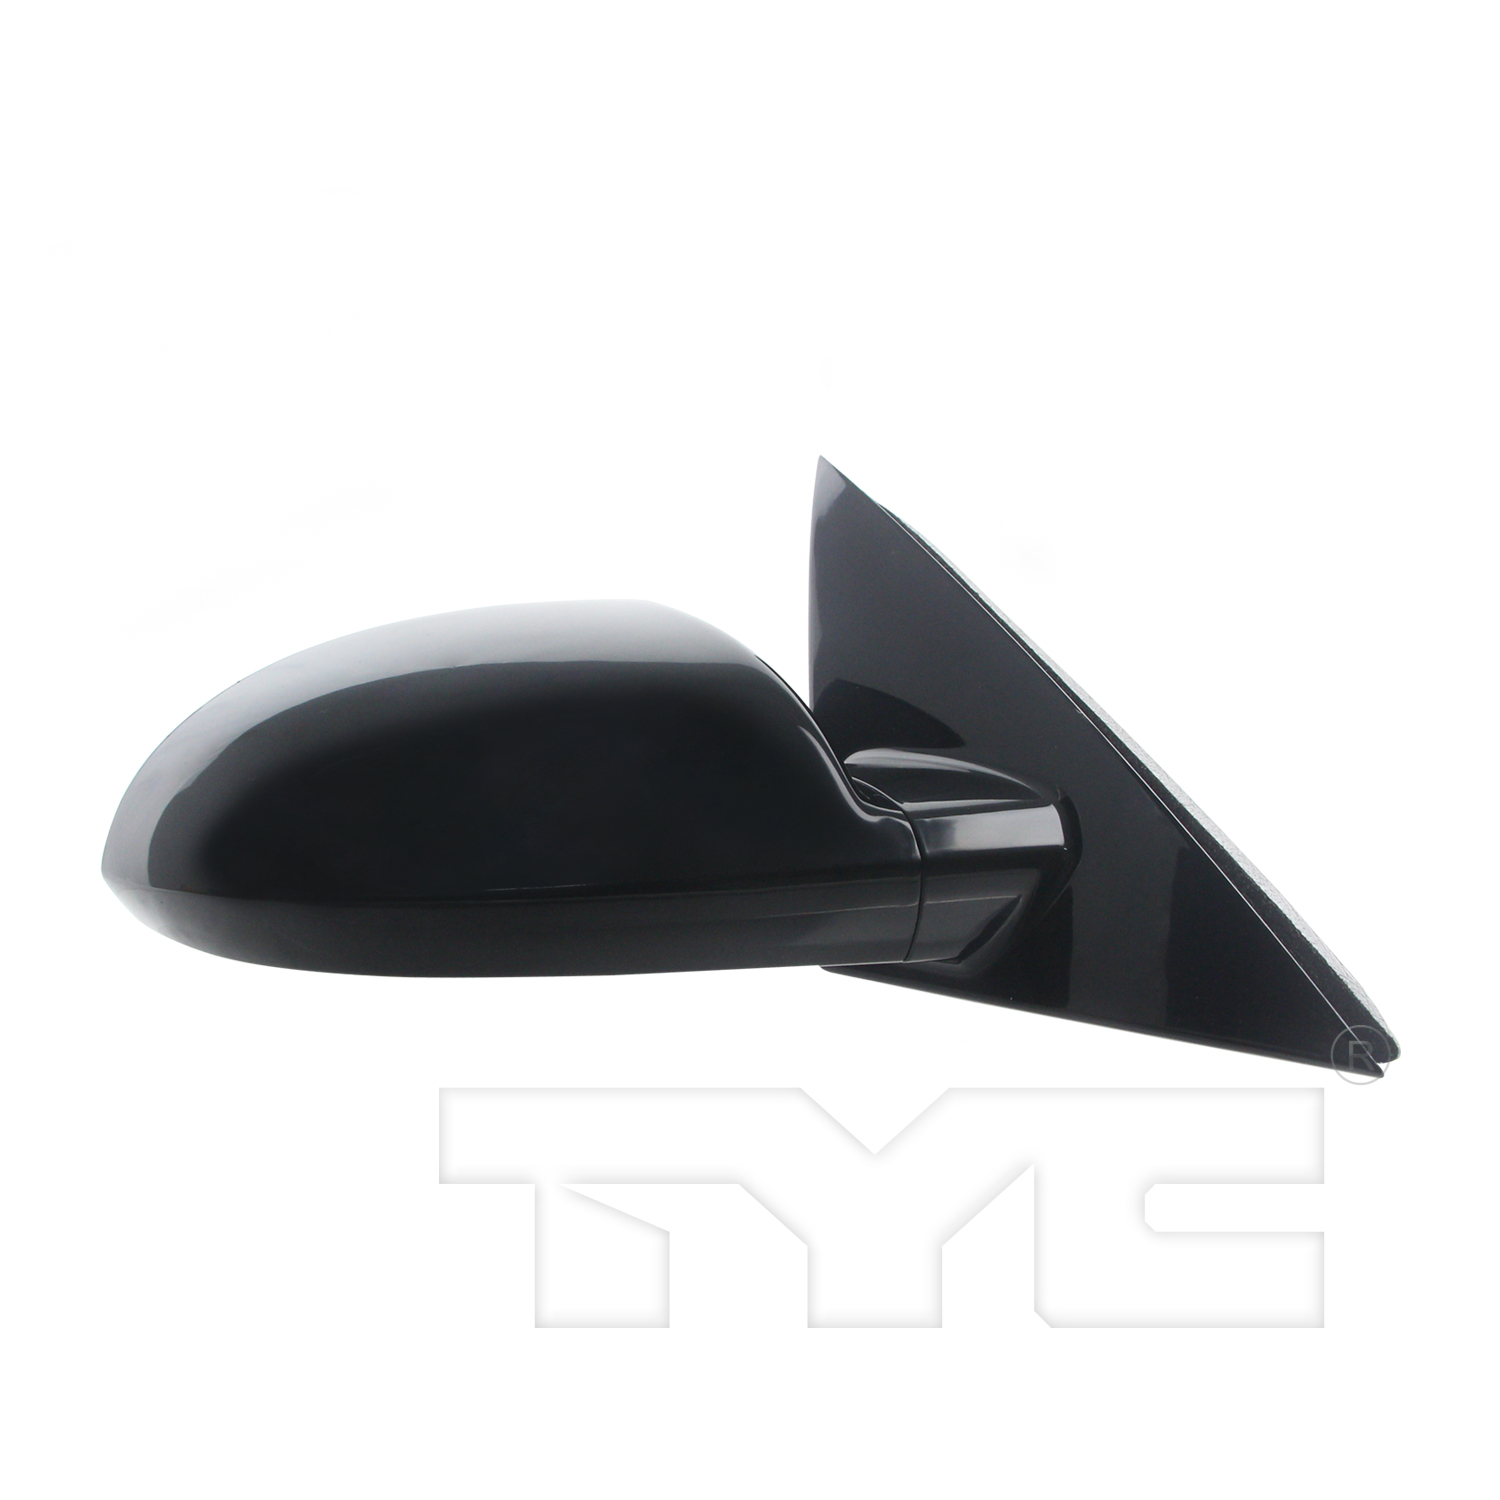 Aftermarket MIRRORS for CHEVROLET - IMPALA, IMPALA,06-13,RT Mirror outside rear view